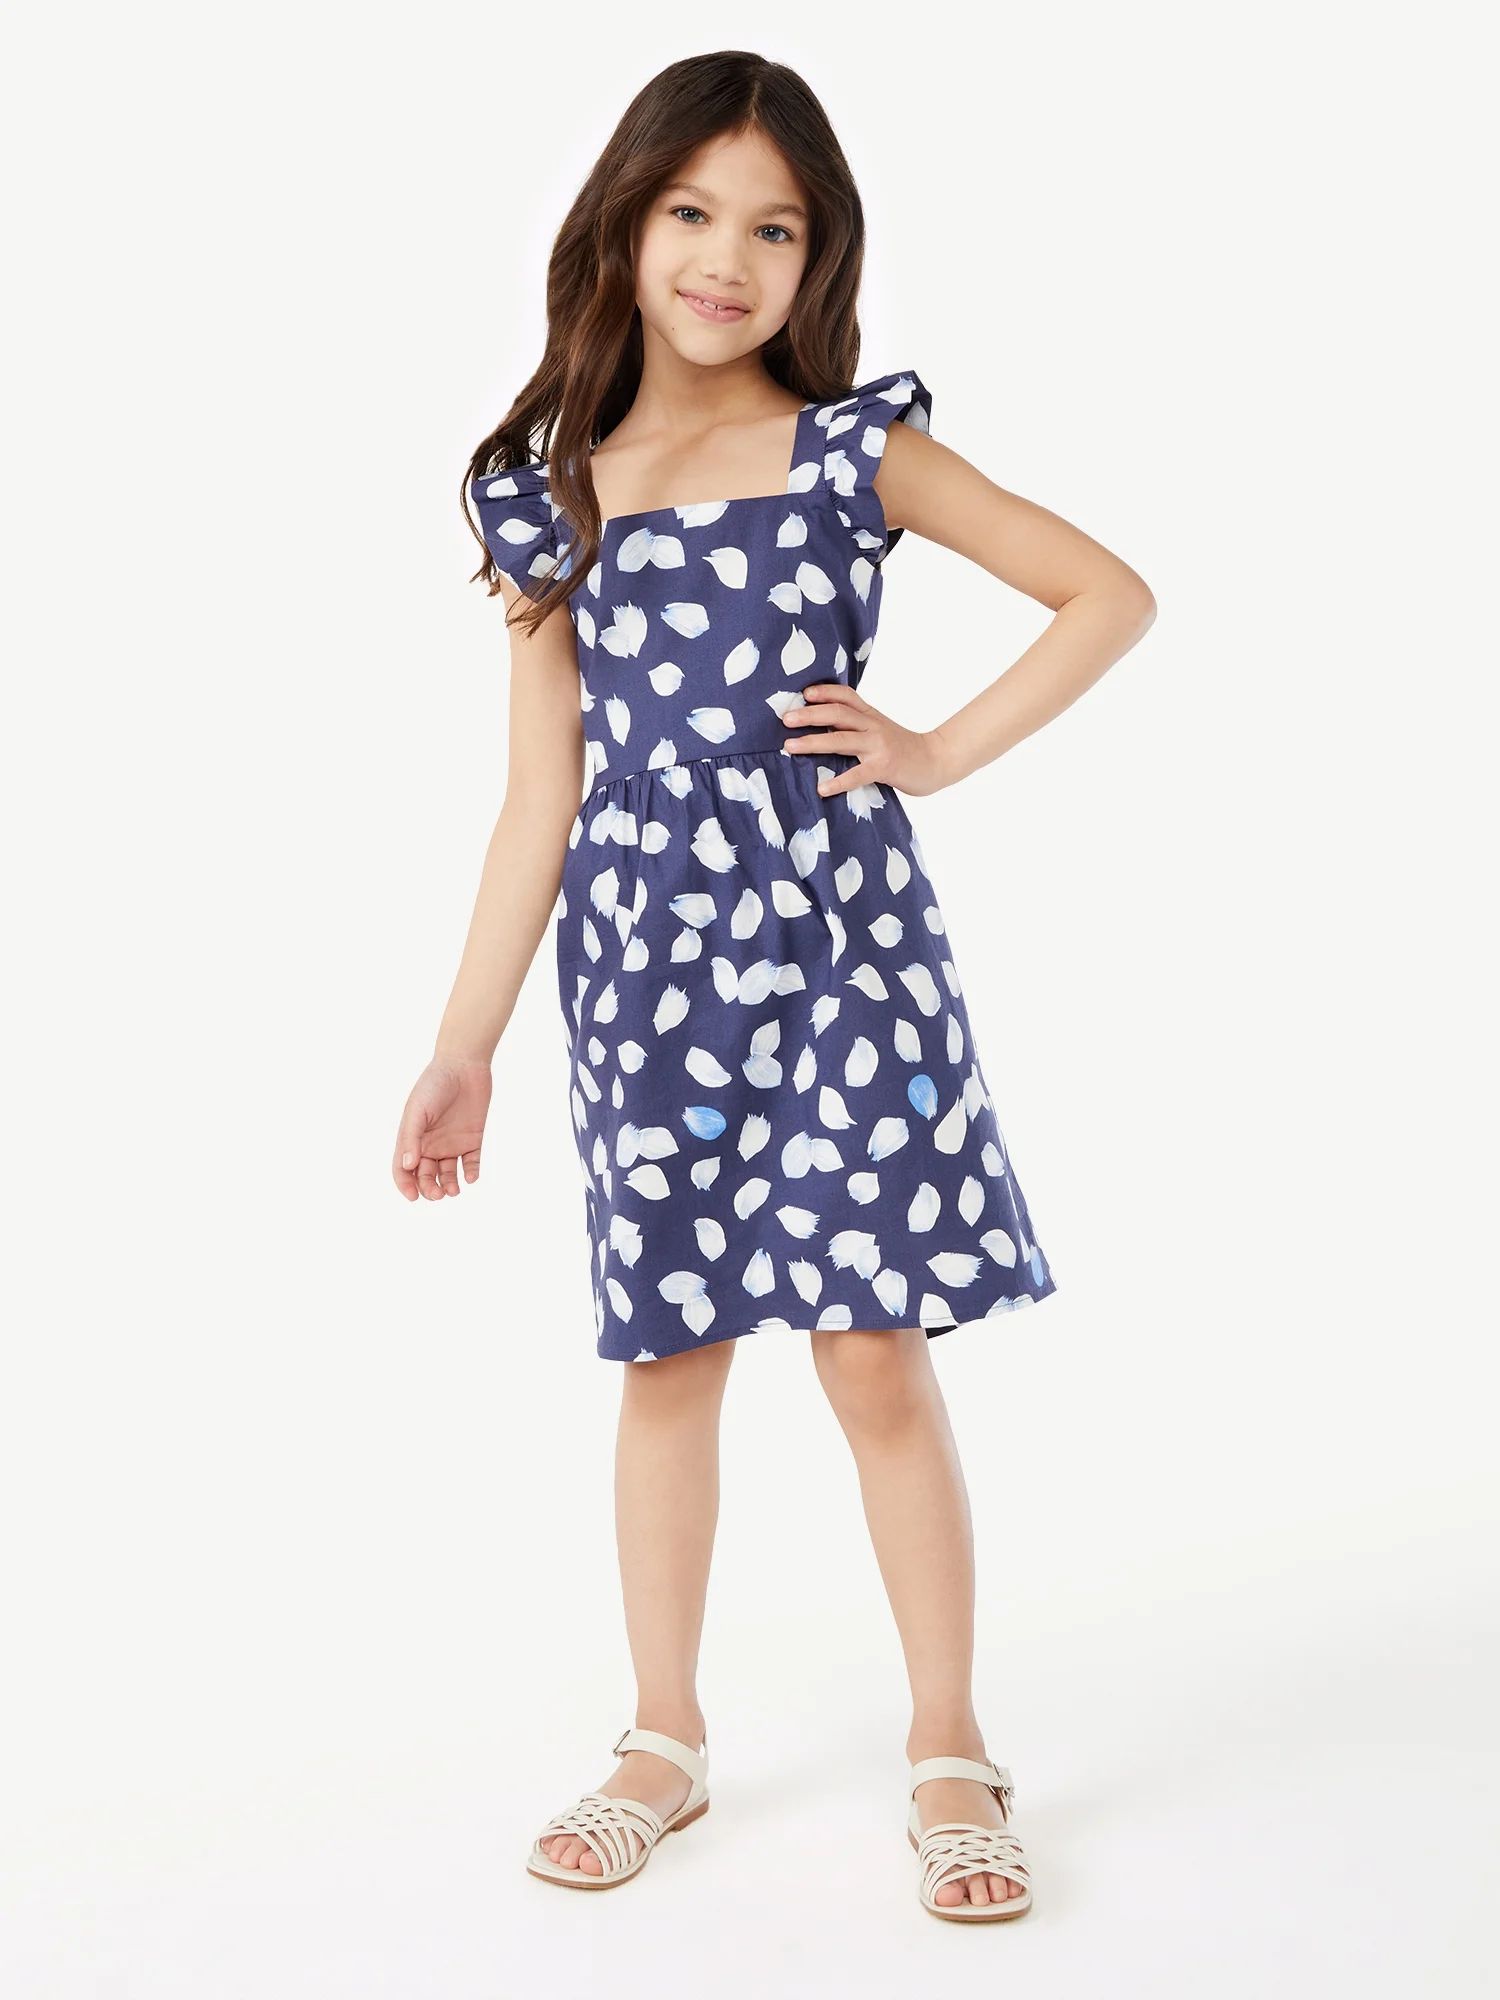 Scoop Girls Mommy & Me Print Dress with Flutter Sleeves, Sizes 4-12 | Walmart (US)